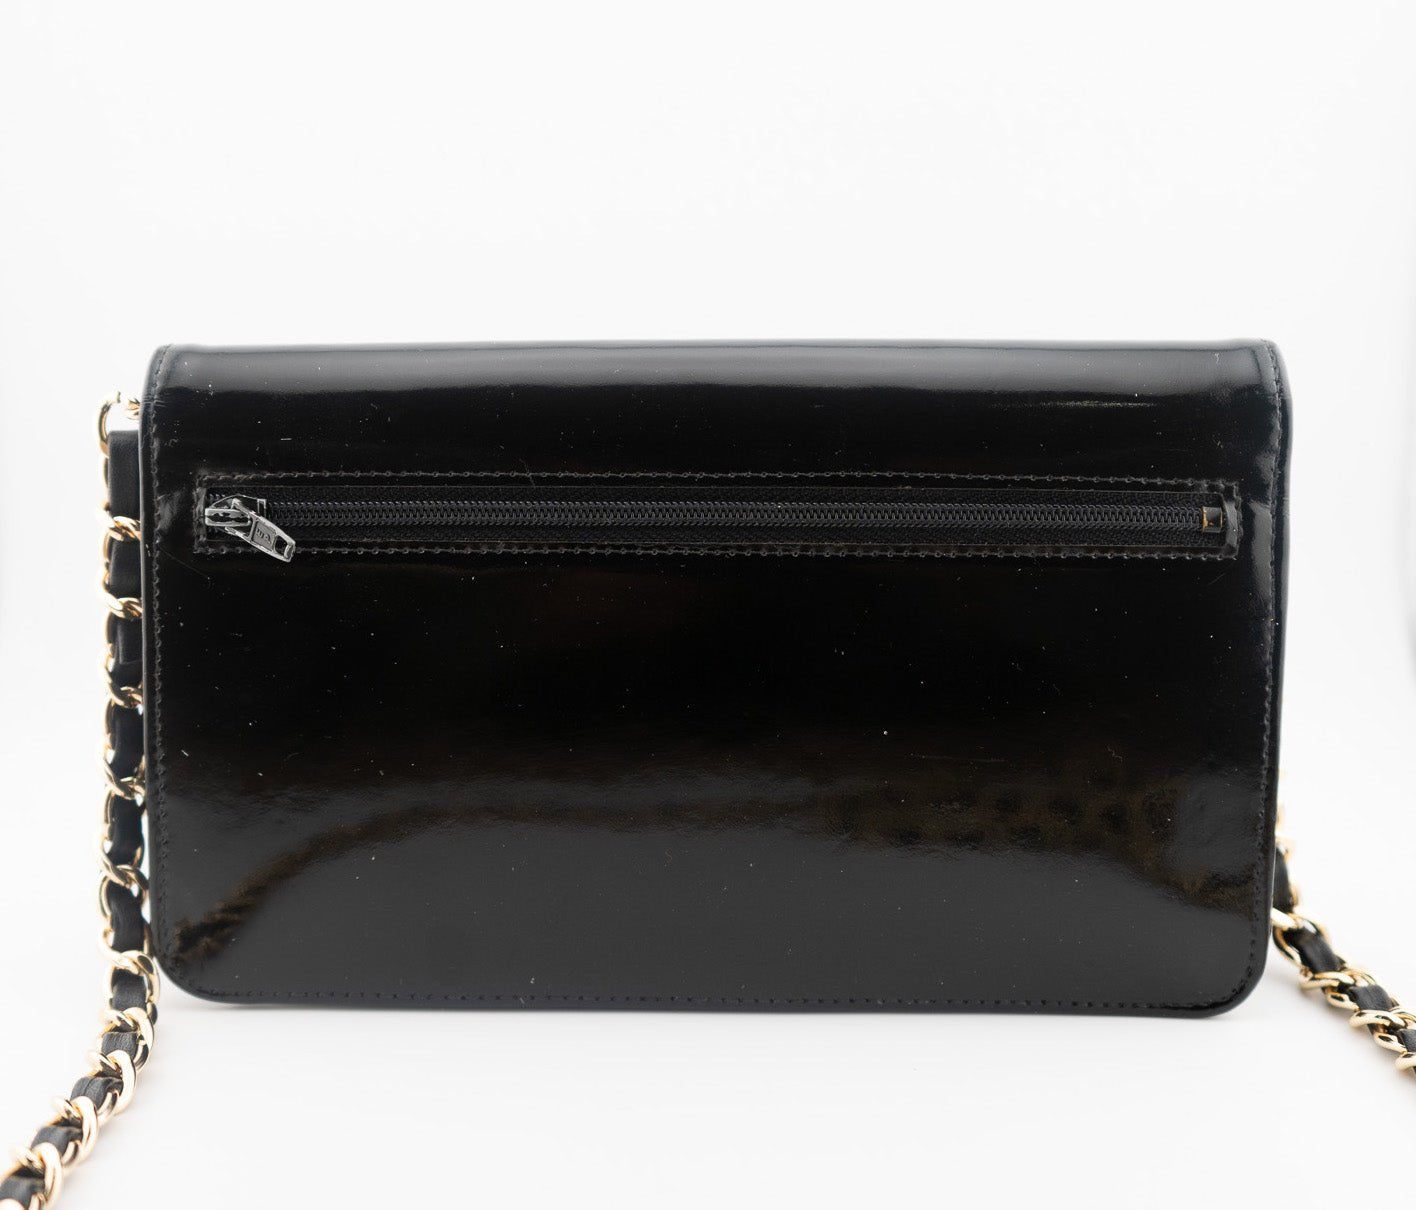 CHANEL Patent Leather Timeless Clutch on Chain - Bag Envy